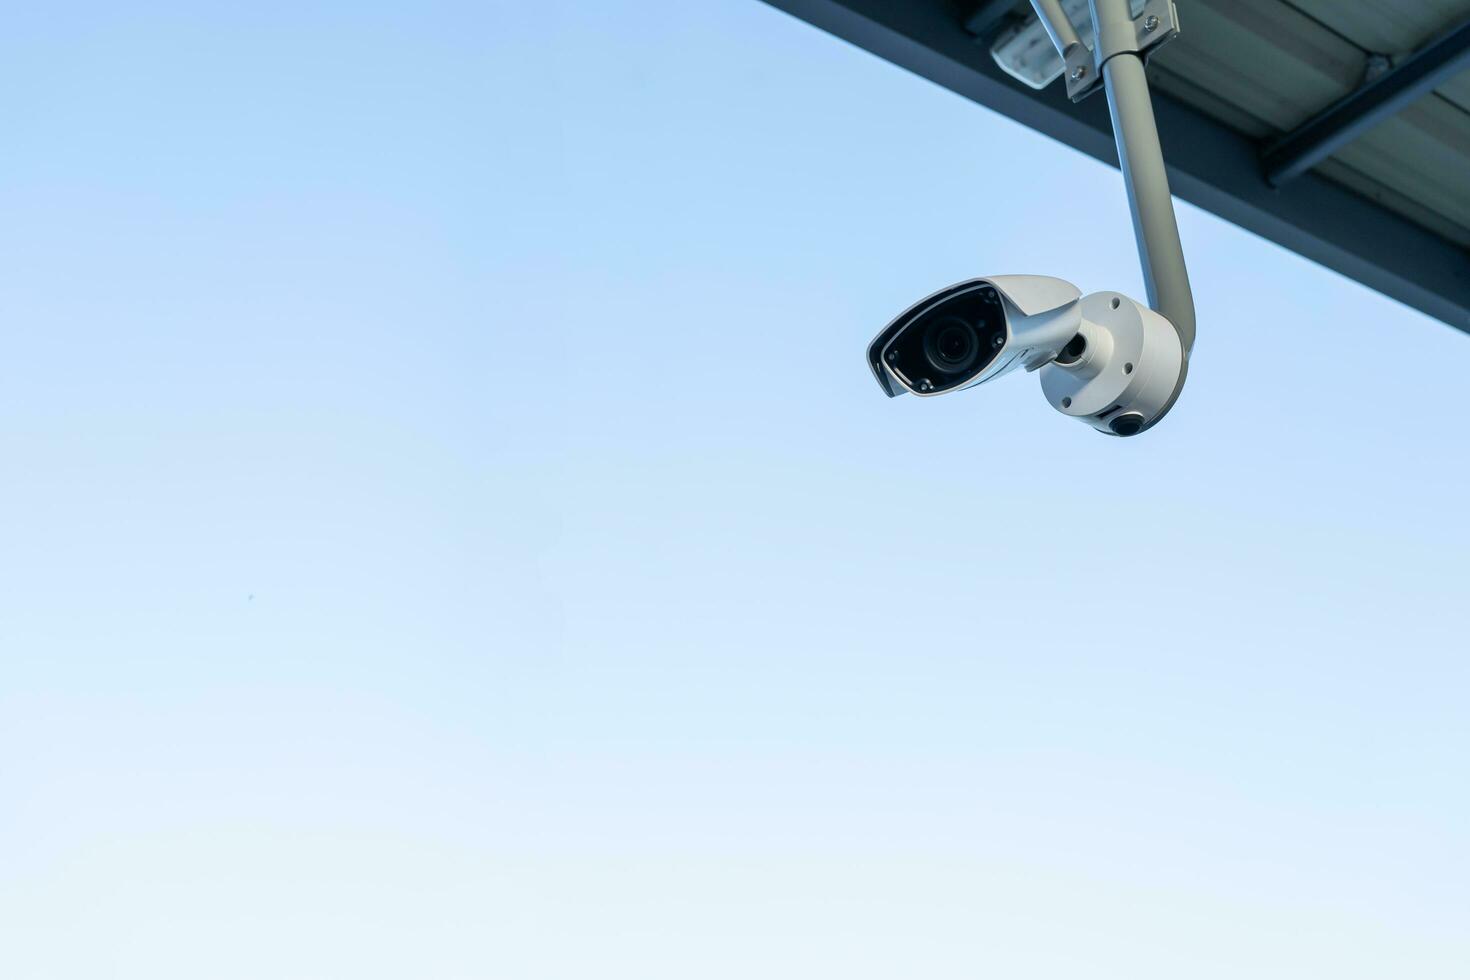 CCTV surveillance security camera video equipment on pole outdoor building safety system area control and copy space. Smart camera theft protection. photo